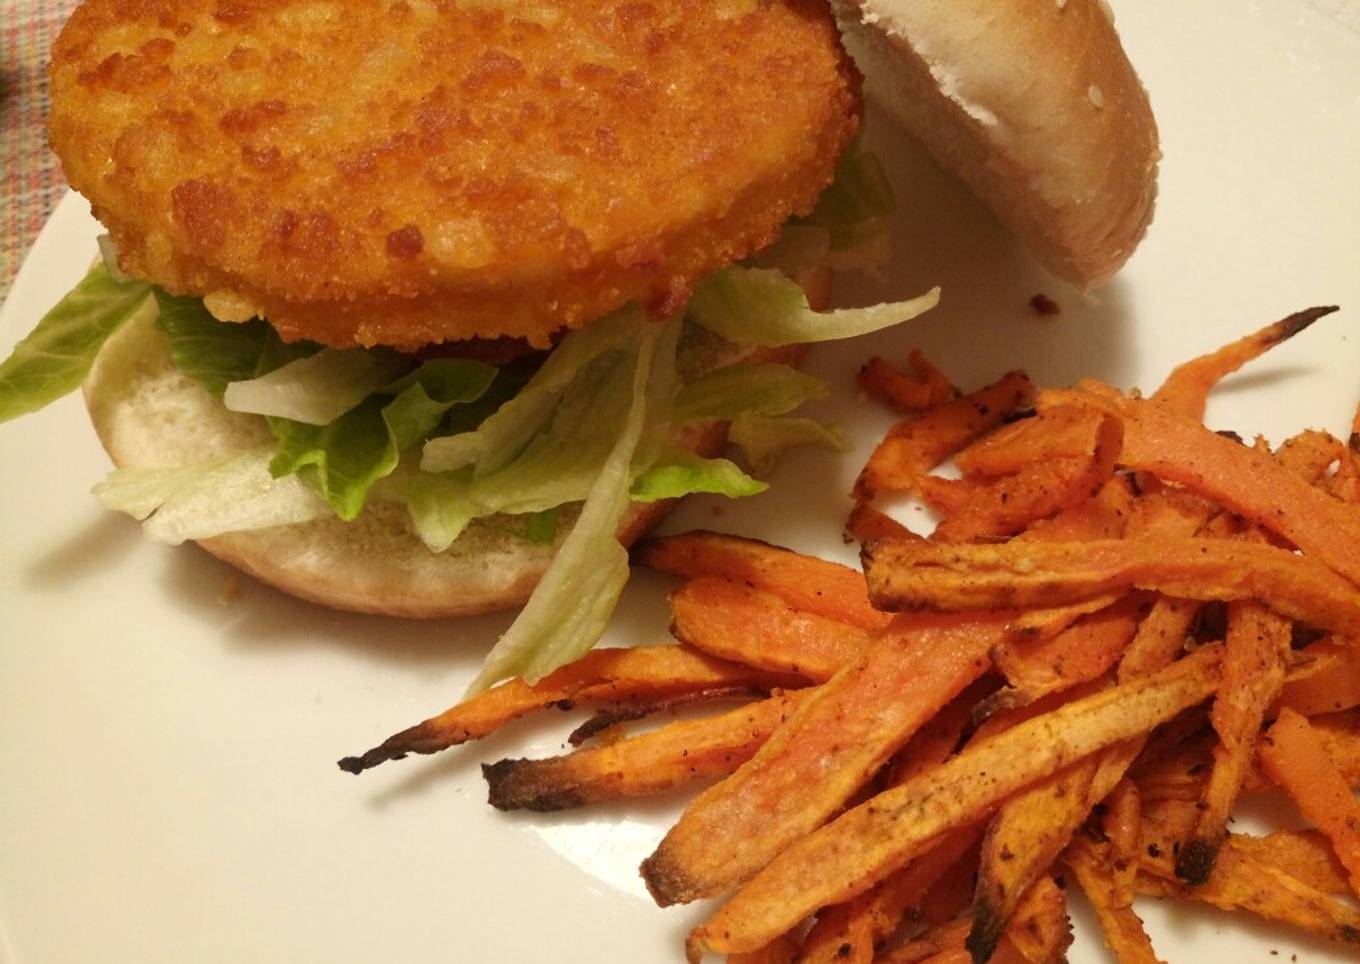 Chicken burger with Cajun spiced sweet potato chips